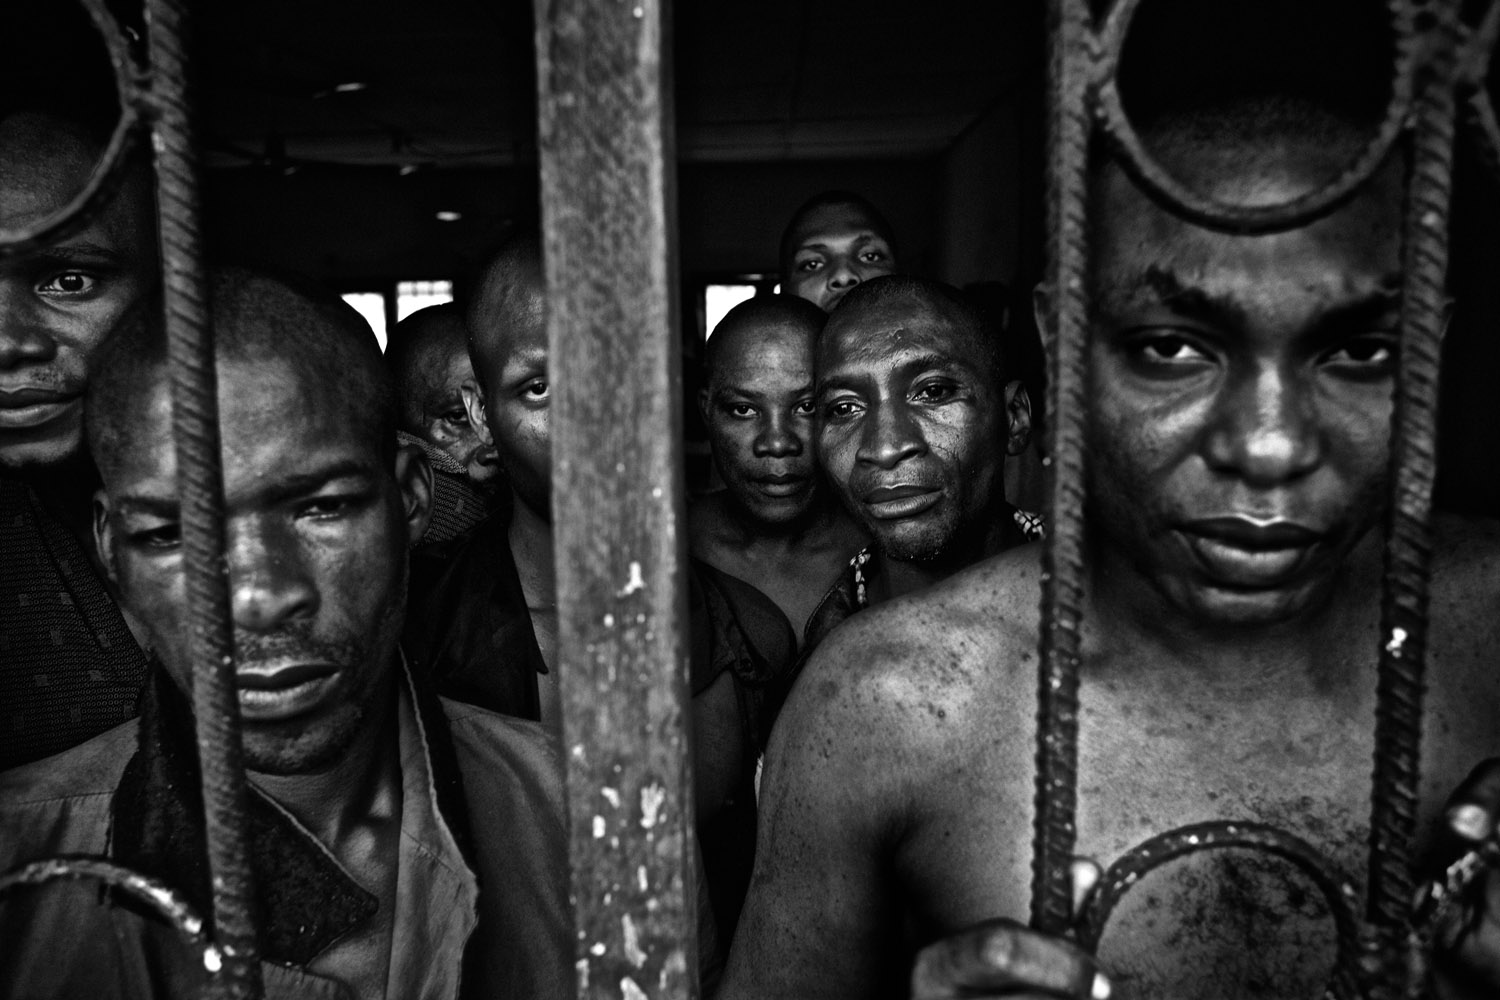 This government-run facility is meant to be a Psychiatric hospital. The Niger Delta, Nigeria. October 2012.